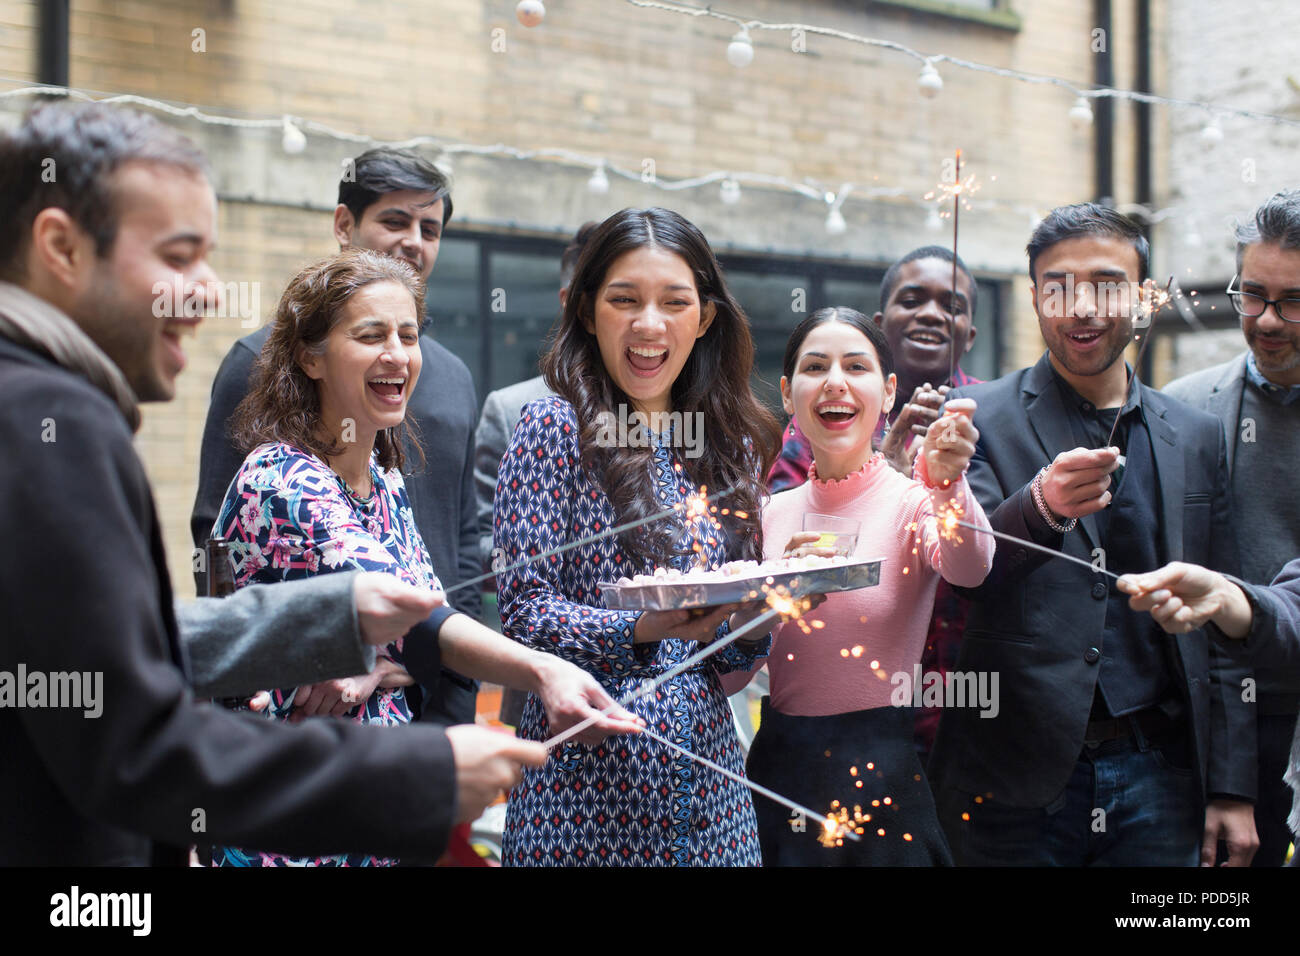 Friends celebrating with woman holding birthday cake Stock Photo